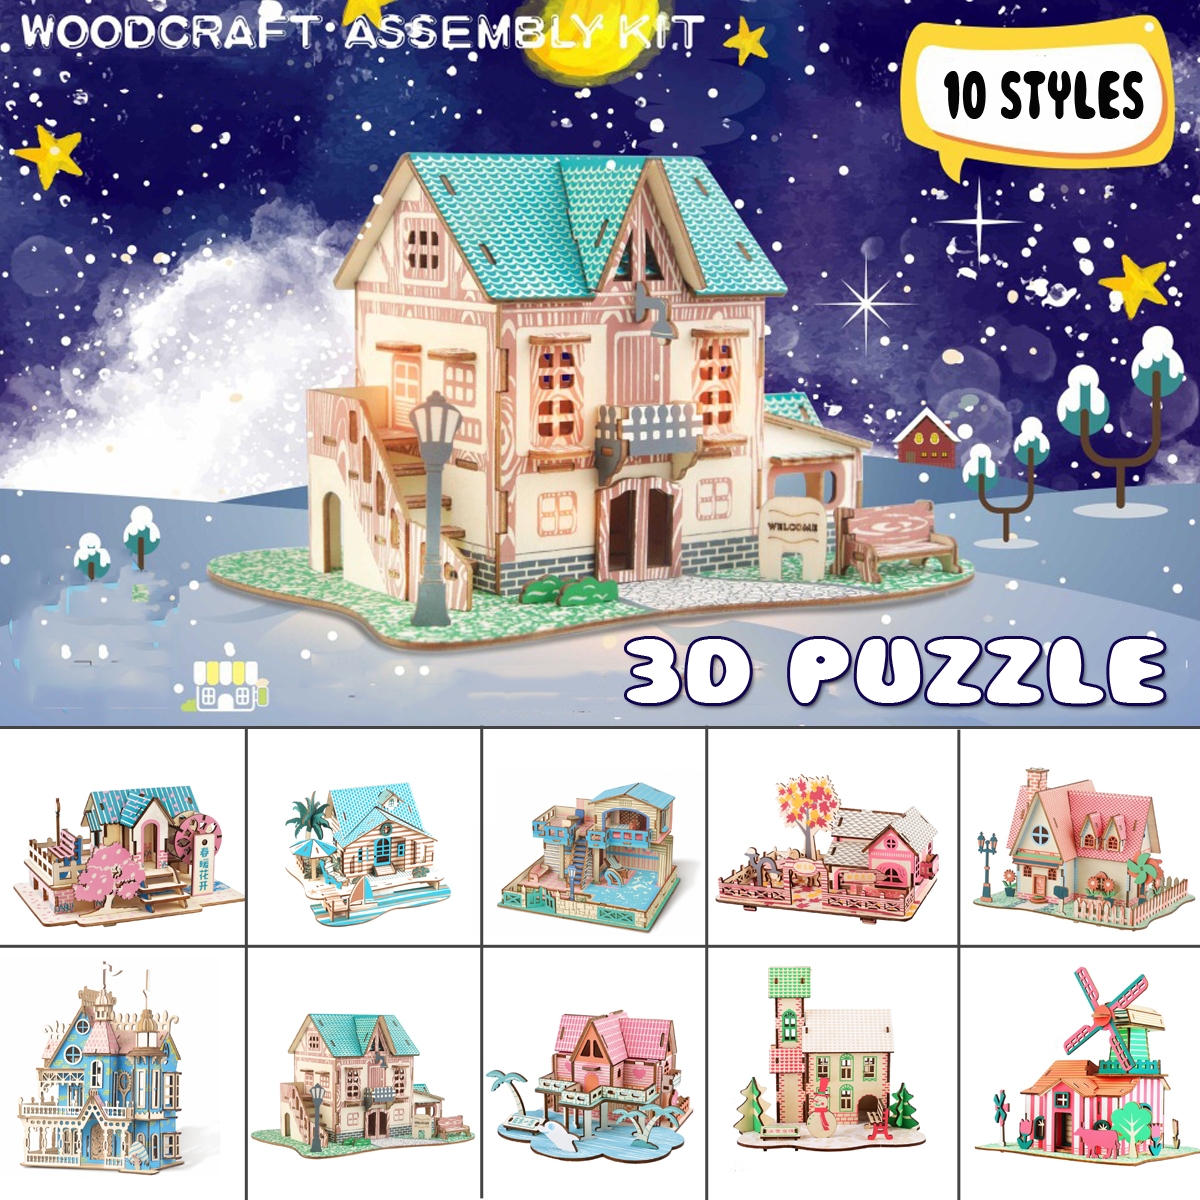 3D Woodcraft Puzzle Assembly House Kit Model Building Educational Toy for Kids Gift